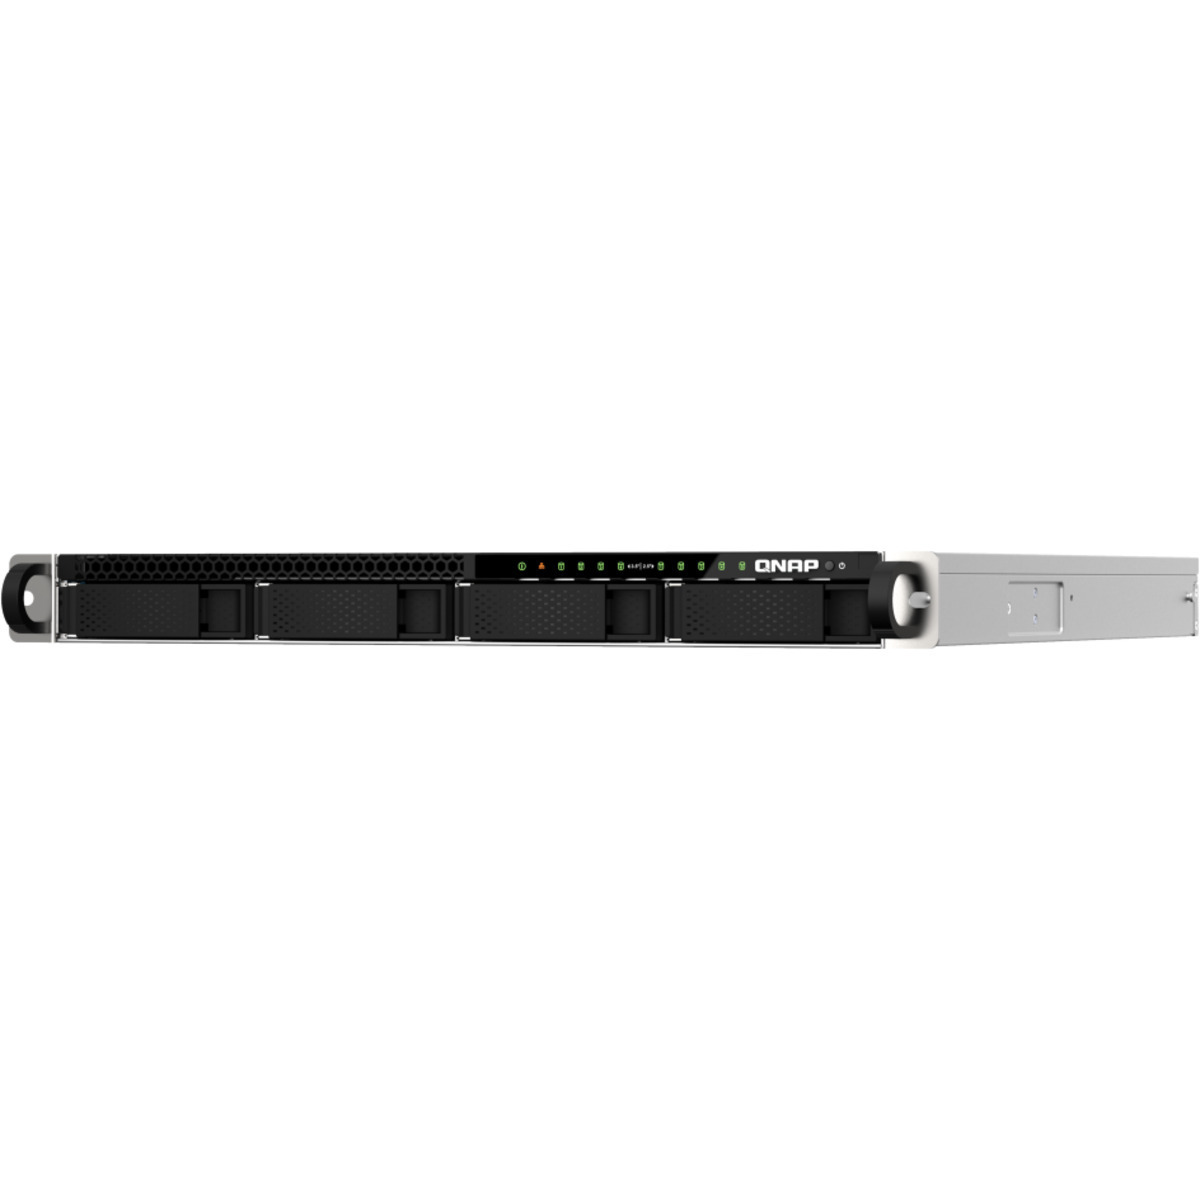 QNAP TS-h987XU-RP QuTS hero Edition 1.5tb 4-Bay RackMount Large Business / Enterprise NAS - Network Attached Storage Device 3x500gb Crucial MX500 CT500MX500SSD1 2.5 560/510MB/s SATA 6Gb/s SSD CONSUMER Class Drives Installed - Burn-In Tested TS-h987XU-RP QuTS hero Edition